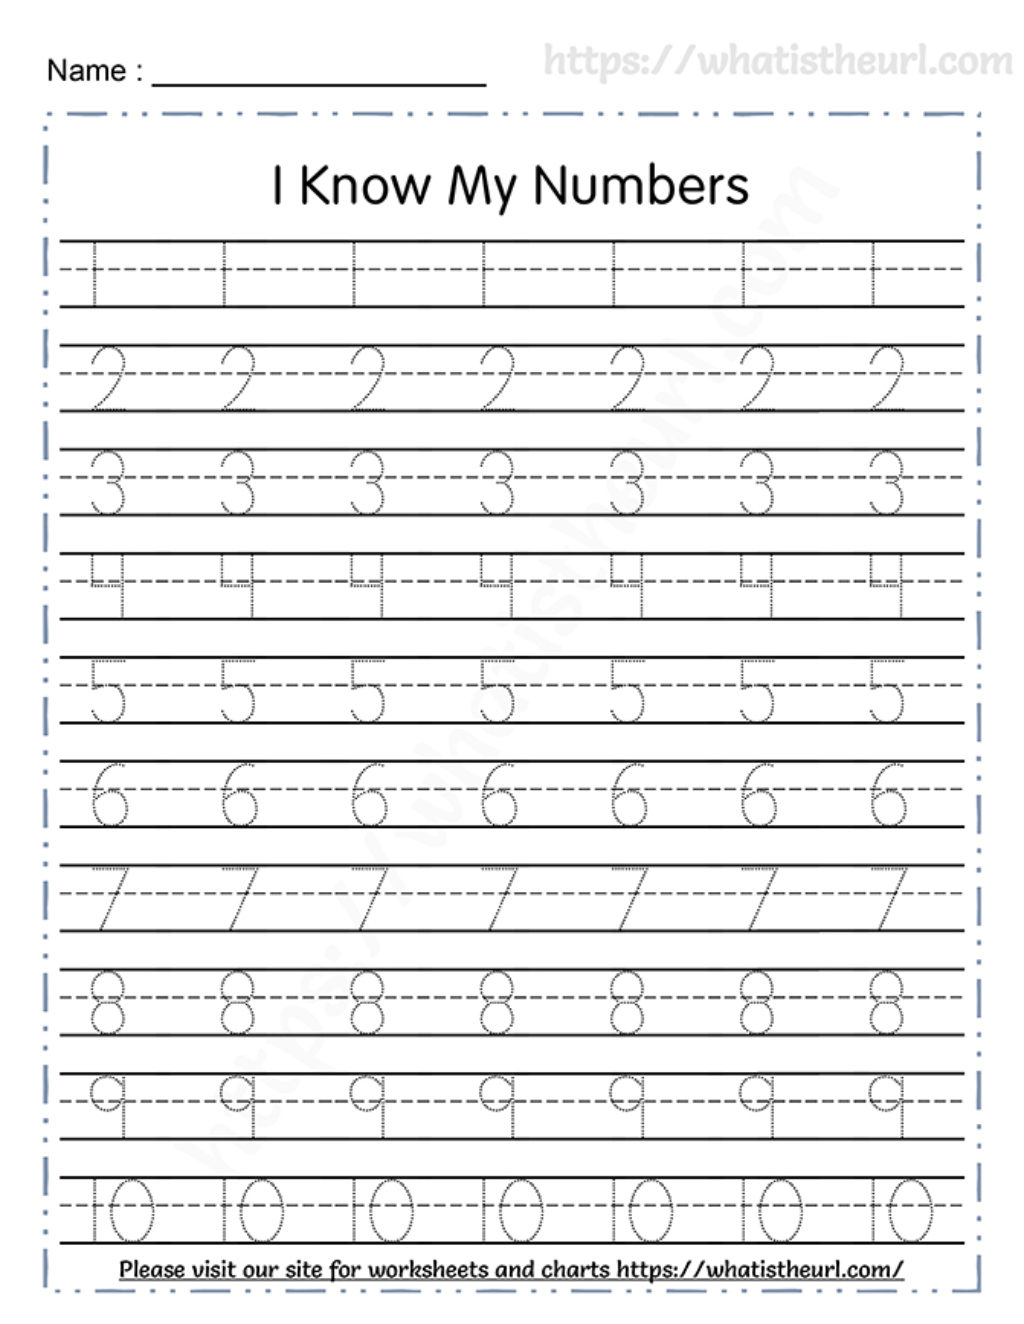 Get 65 Tracing Numbers Worksheets Ideas 56